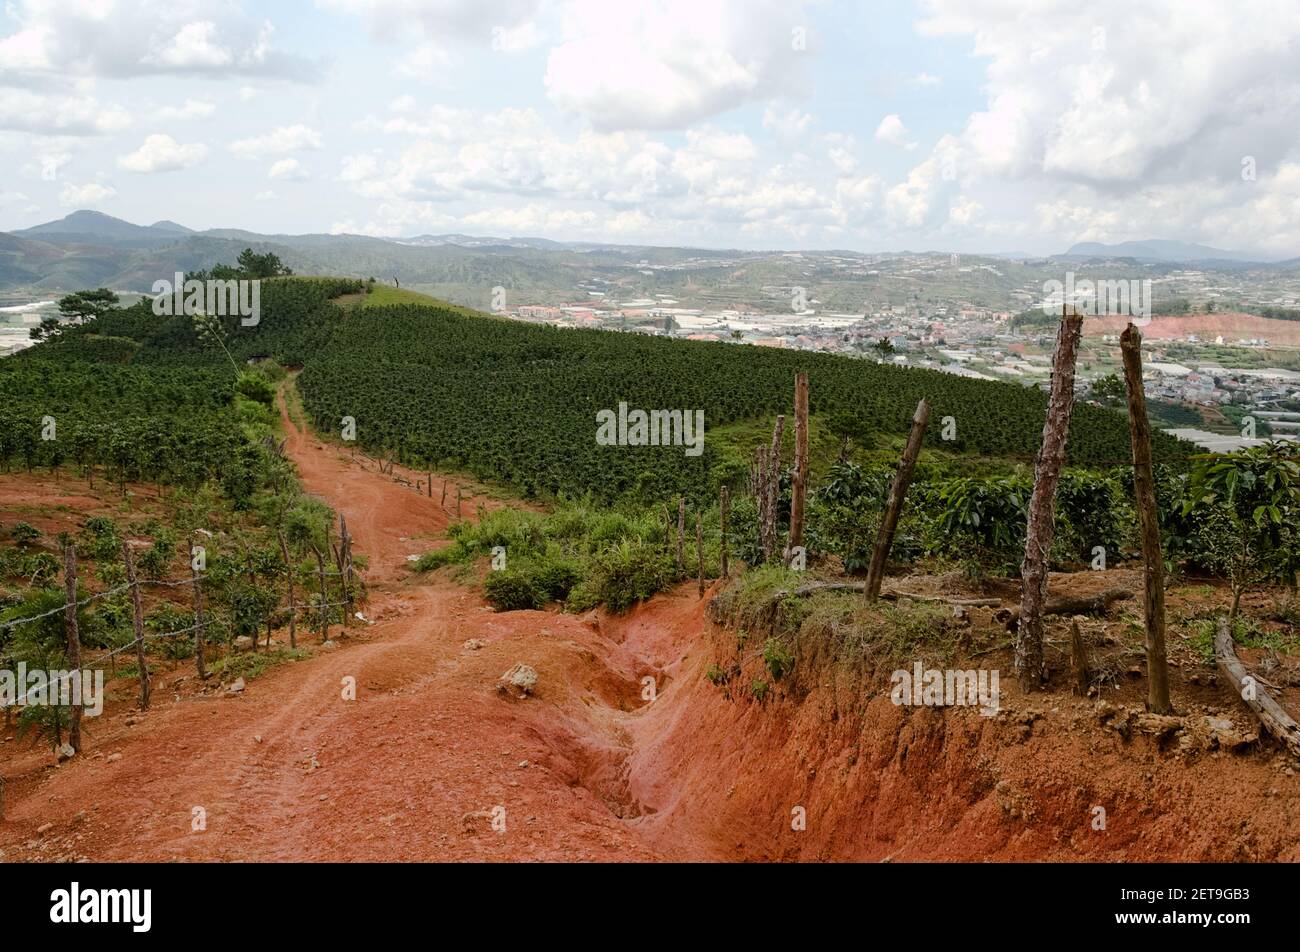 Dirt road along coffee plantations in the mountains near Da Lat city, Vietnam, August, 2015 Stock Photo